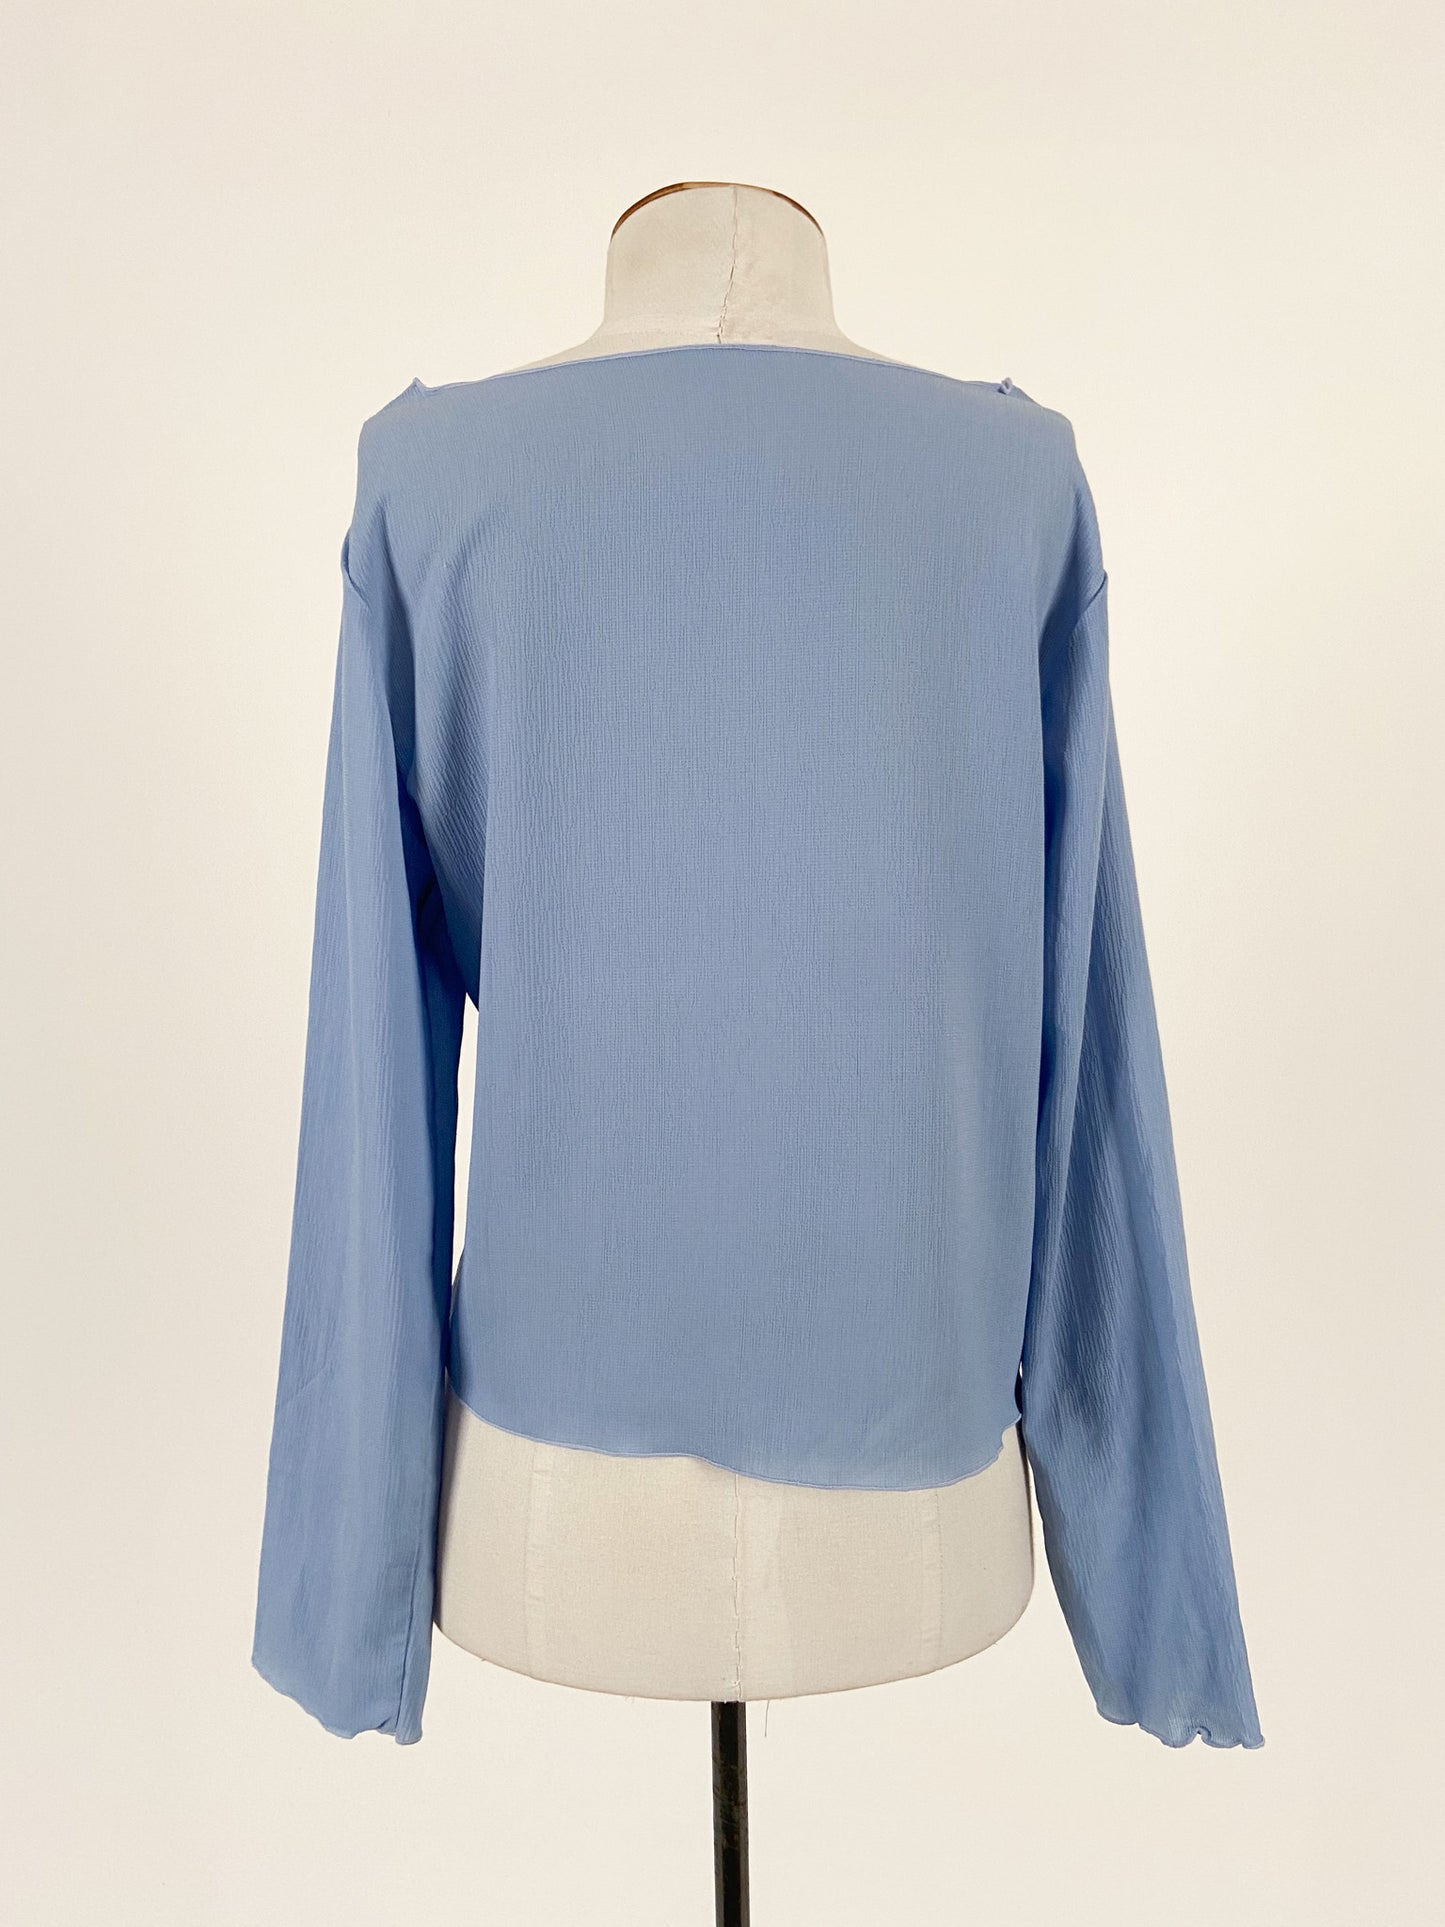 Unknown Brand | Blue Casual/Workwear Top | Size S